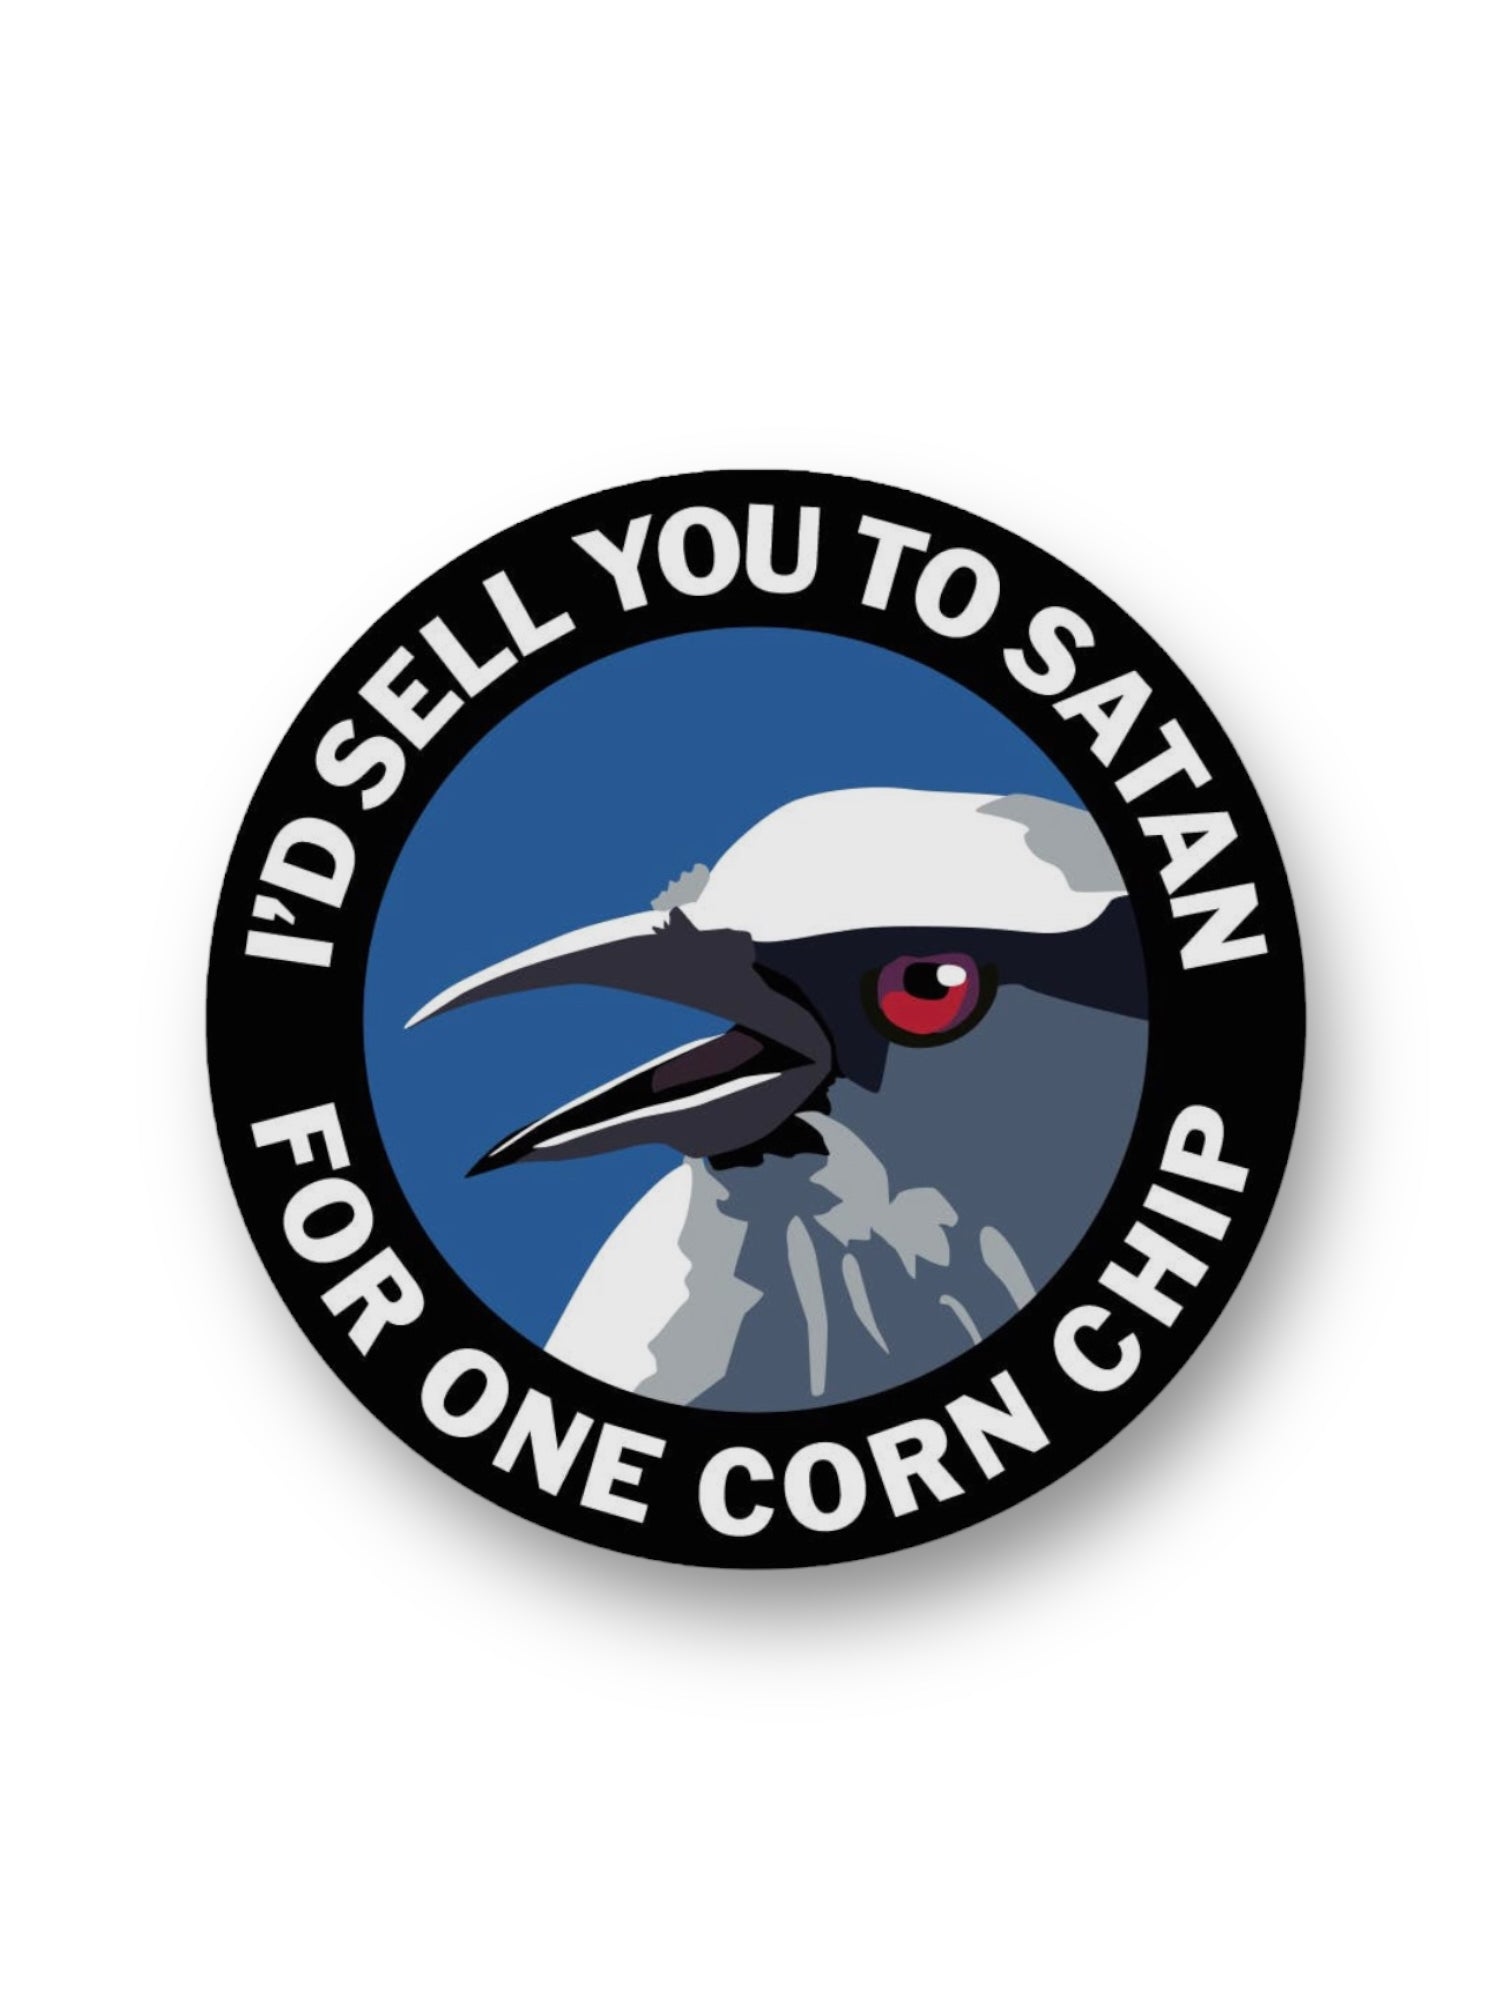 I would sell you to satan for one corn chip funny bird sticker by the mincing mockingbird sold by Le Monkey House